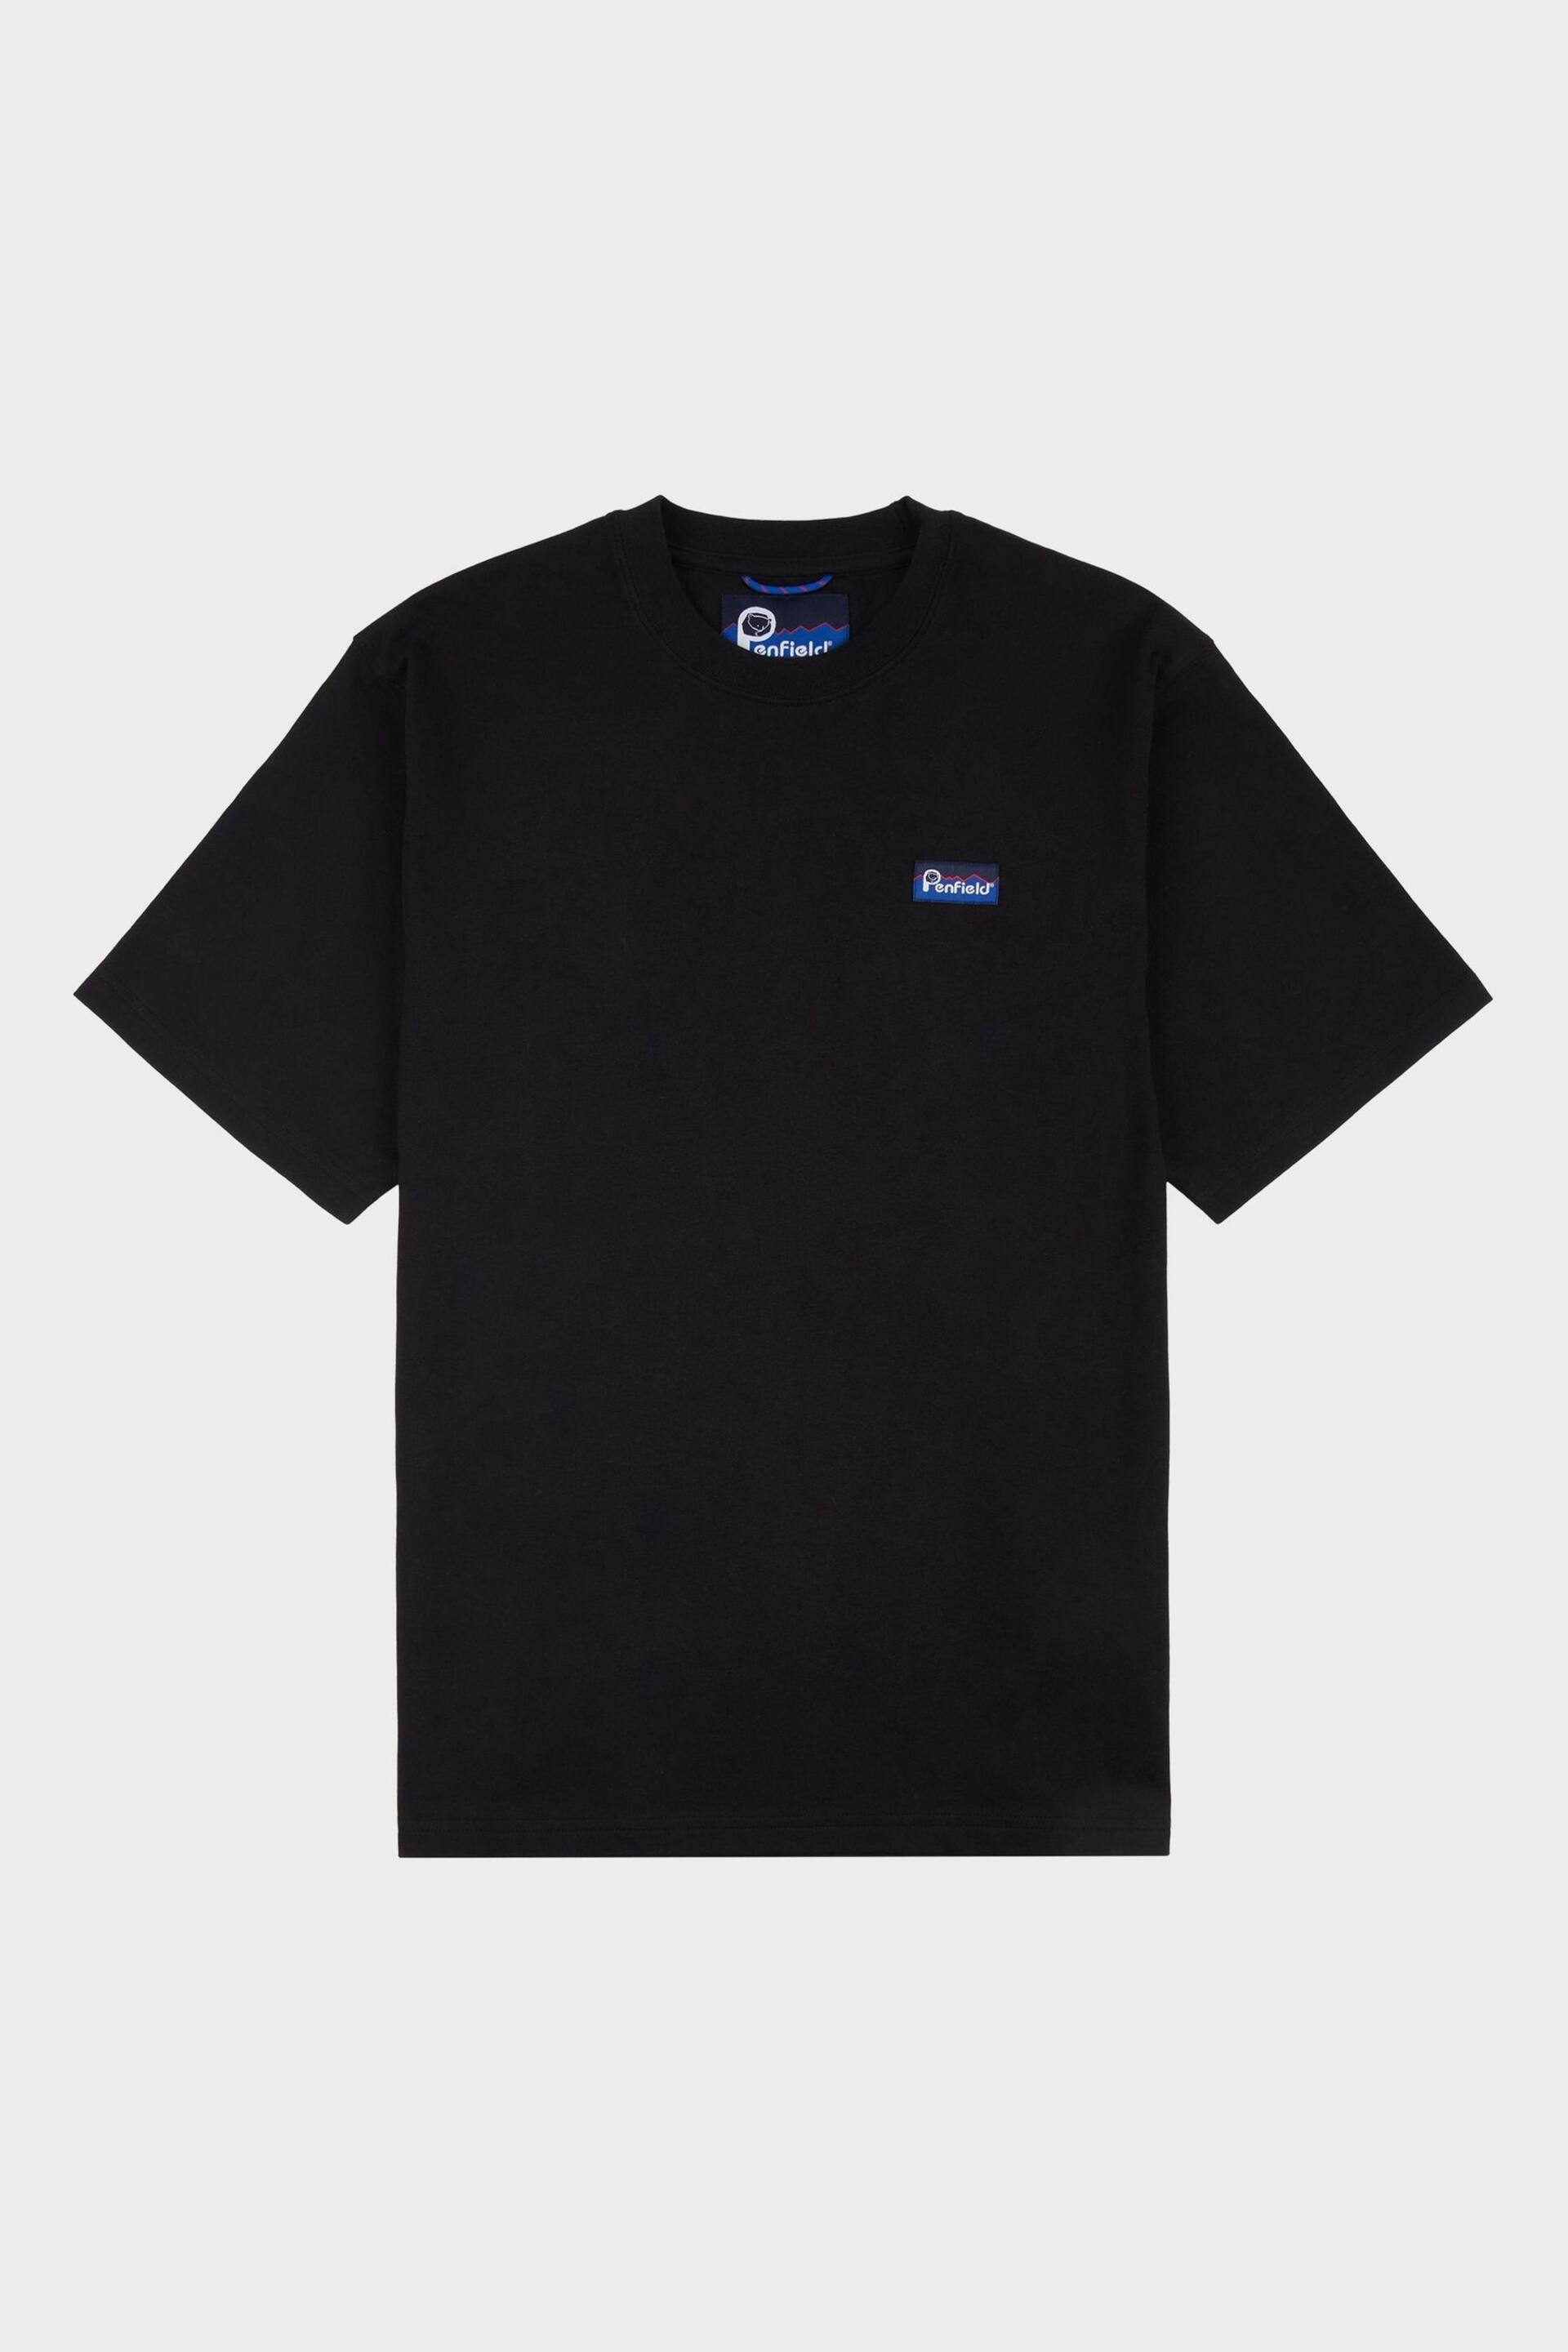 Penfield Mens Relaxed Fit Original Logo T-Shirt - Image 4 of 8